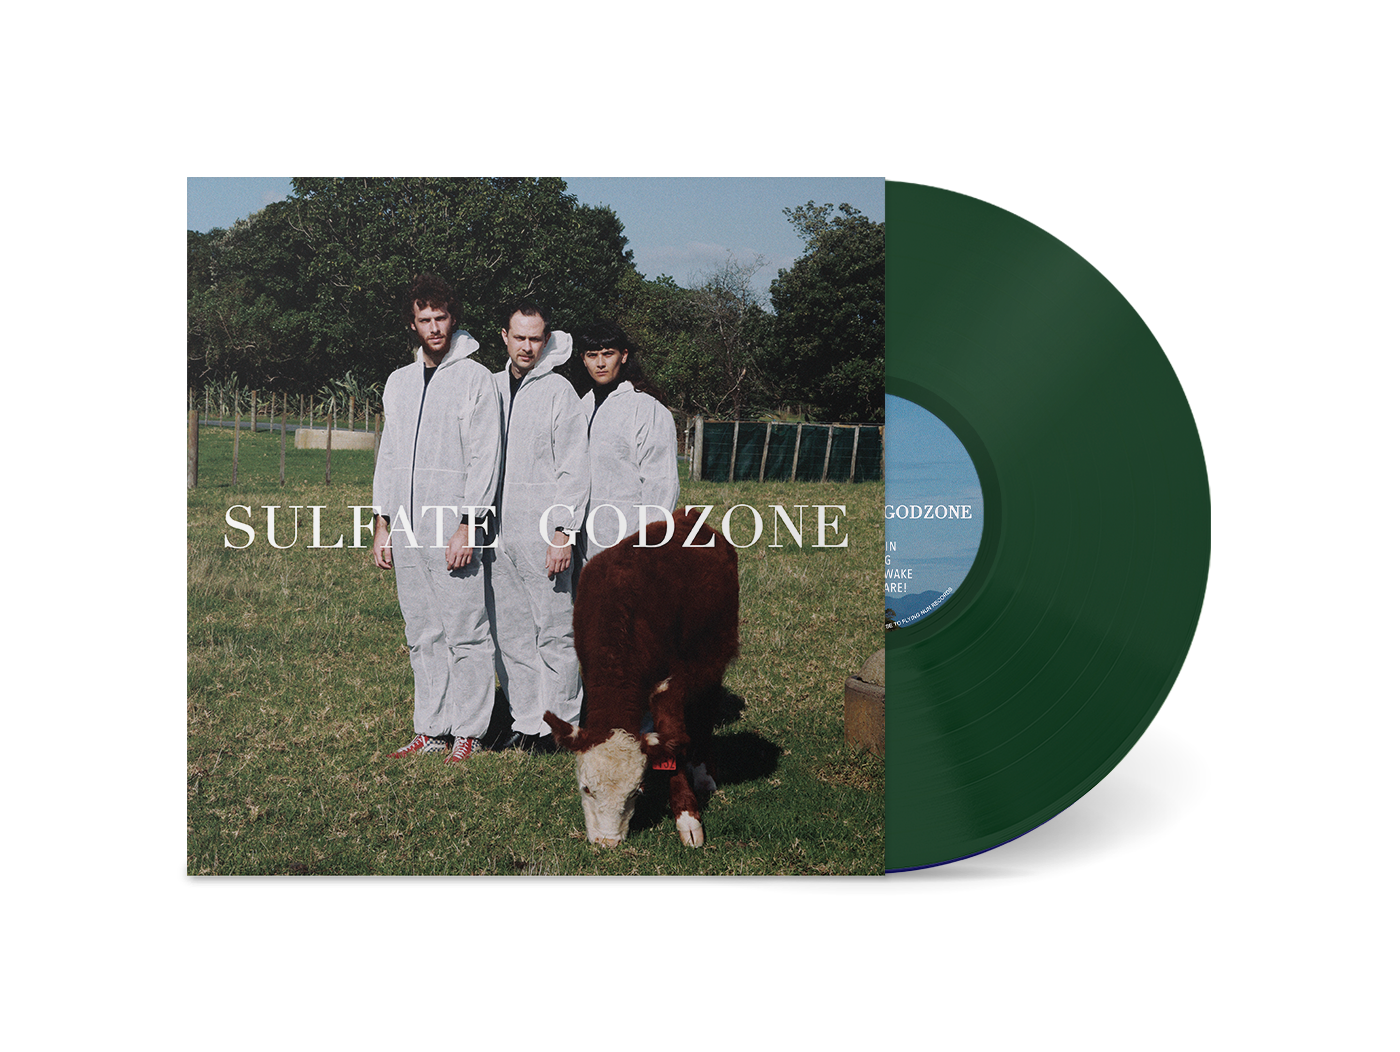 Sulfate band from NZ  - Godzone | Vinyl LP